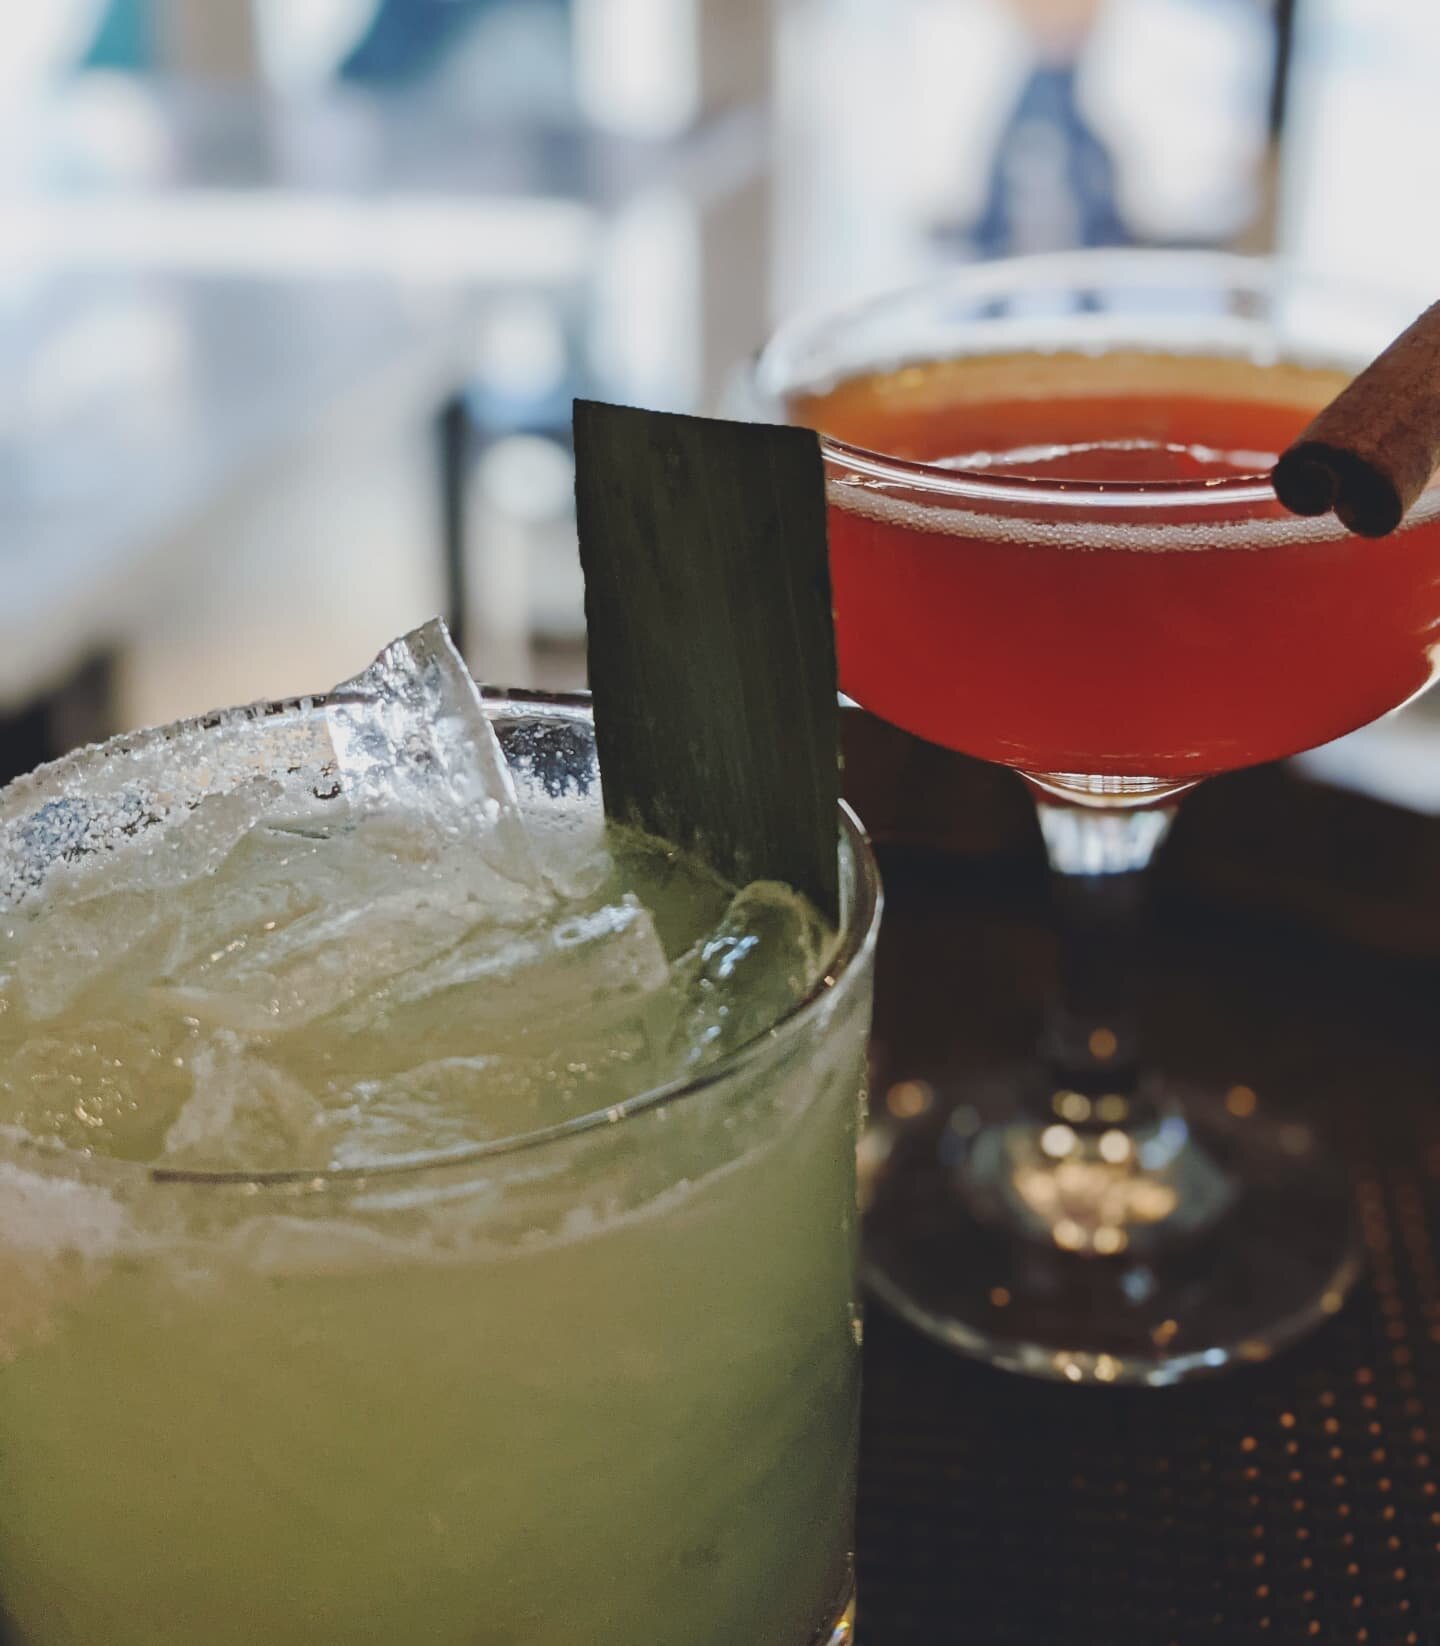 The spirit of Christmas may be on its way out, but we've got enough spirits for the whole year round!

Come try our two agave based cocktails: the Pois (a smooth mezcal and snap pea sipper) and the Canelle (a classy bitter sweet tequila take on a Pap